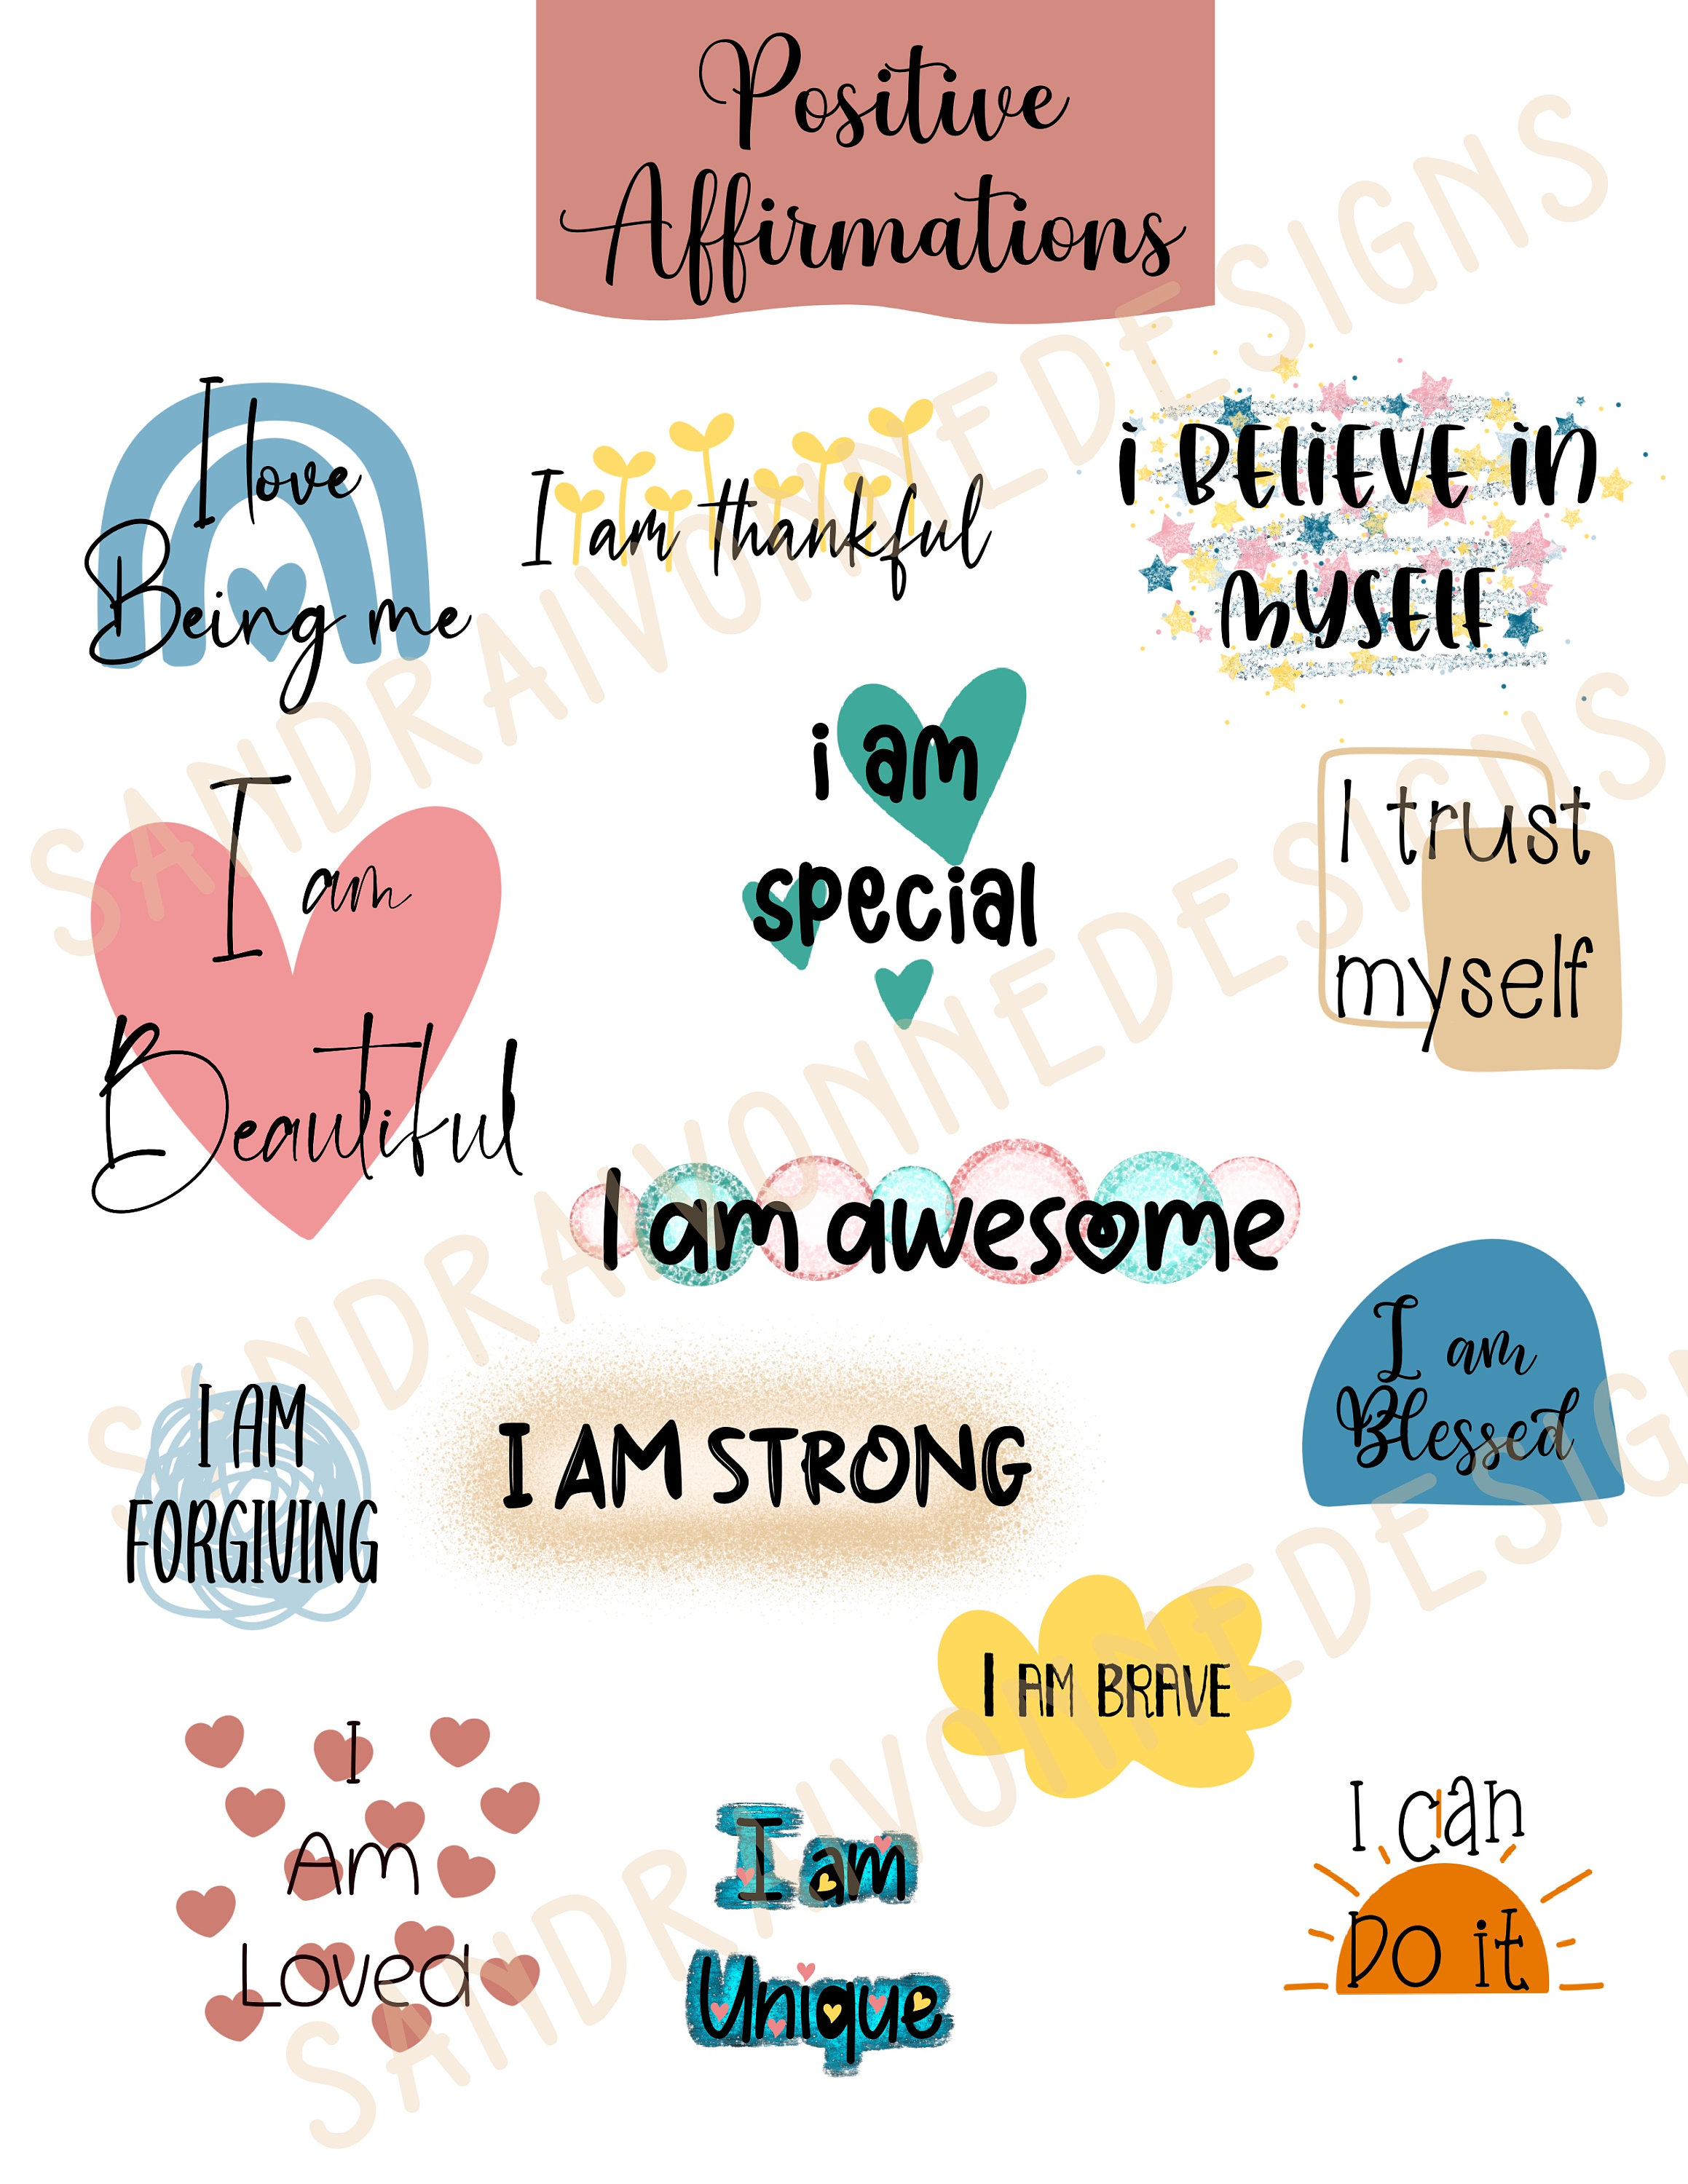 Retro positive affirmation stickers, good vibe stickers, positive